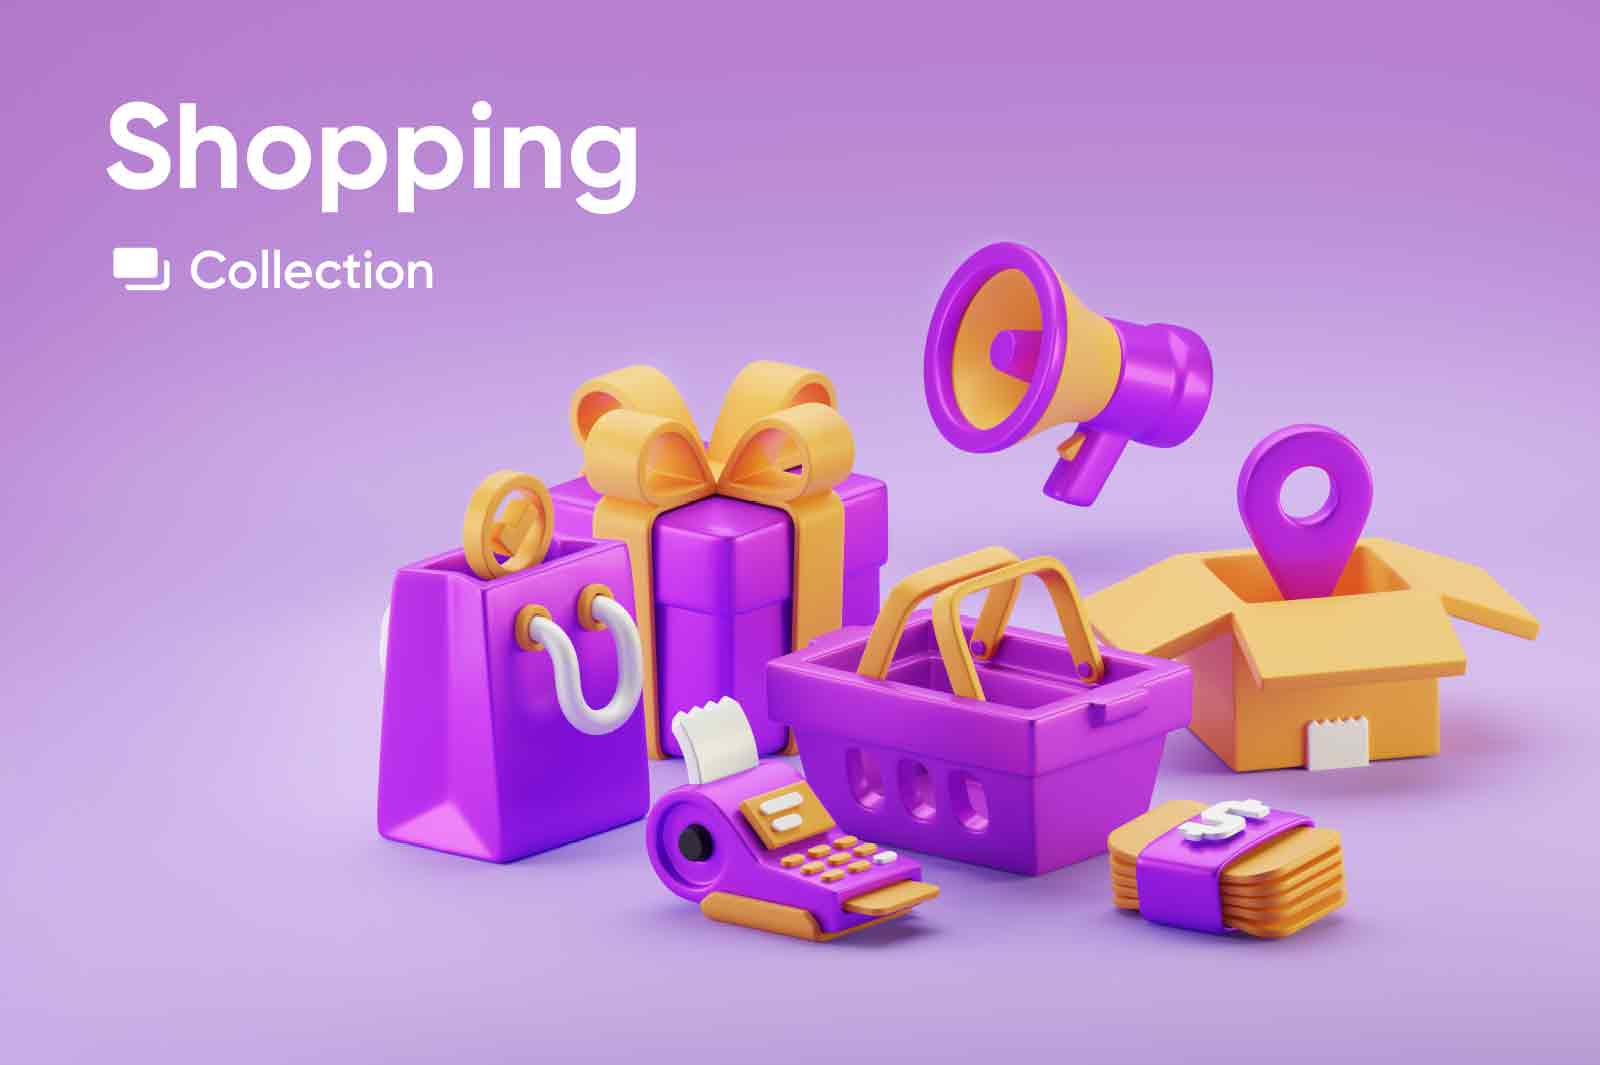 E-commerce, shopping 3D icons, objects in yellow-purple colors. Isolated on white background attached. Blender, transparent PNG and JPG.